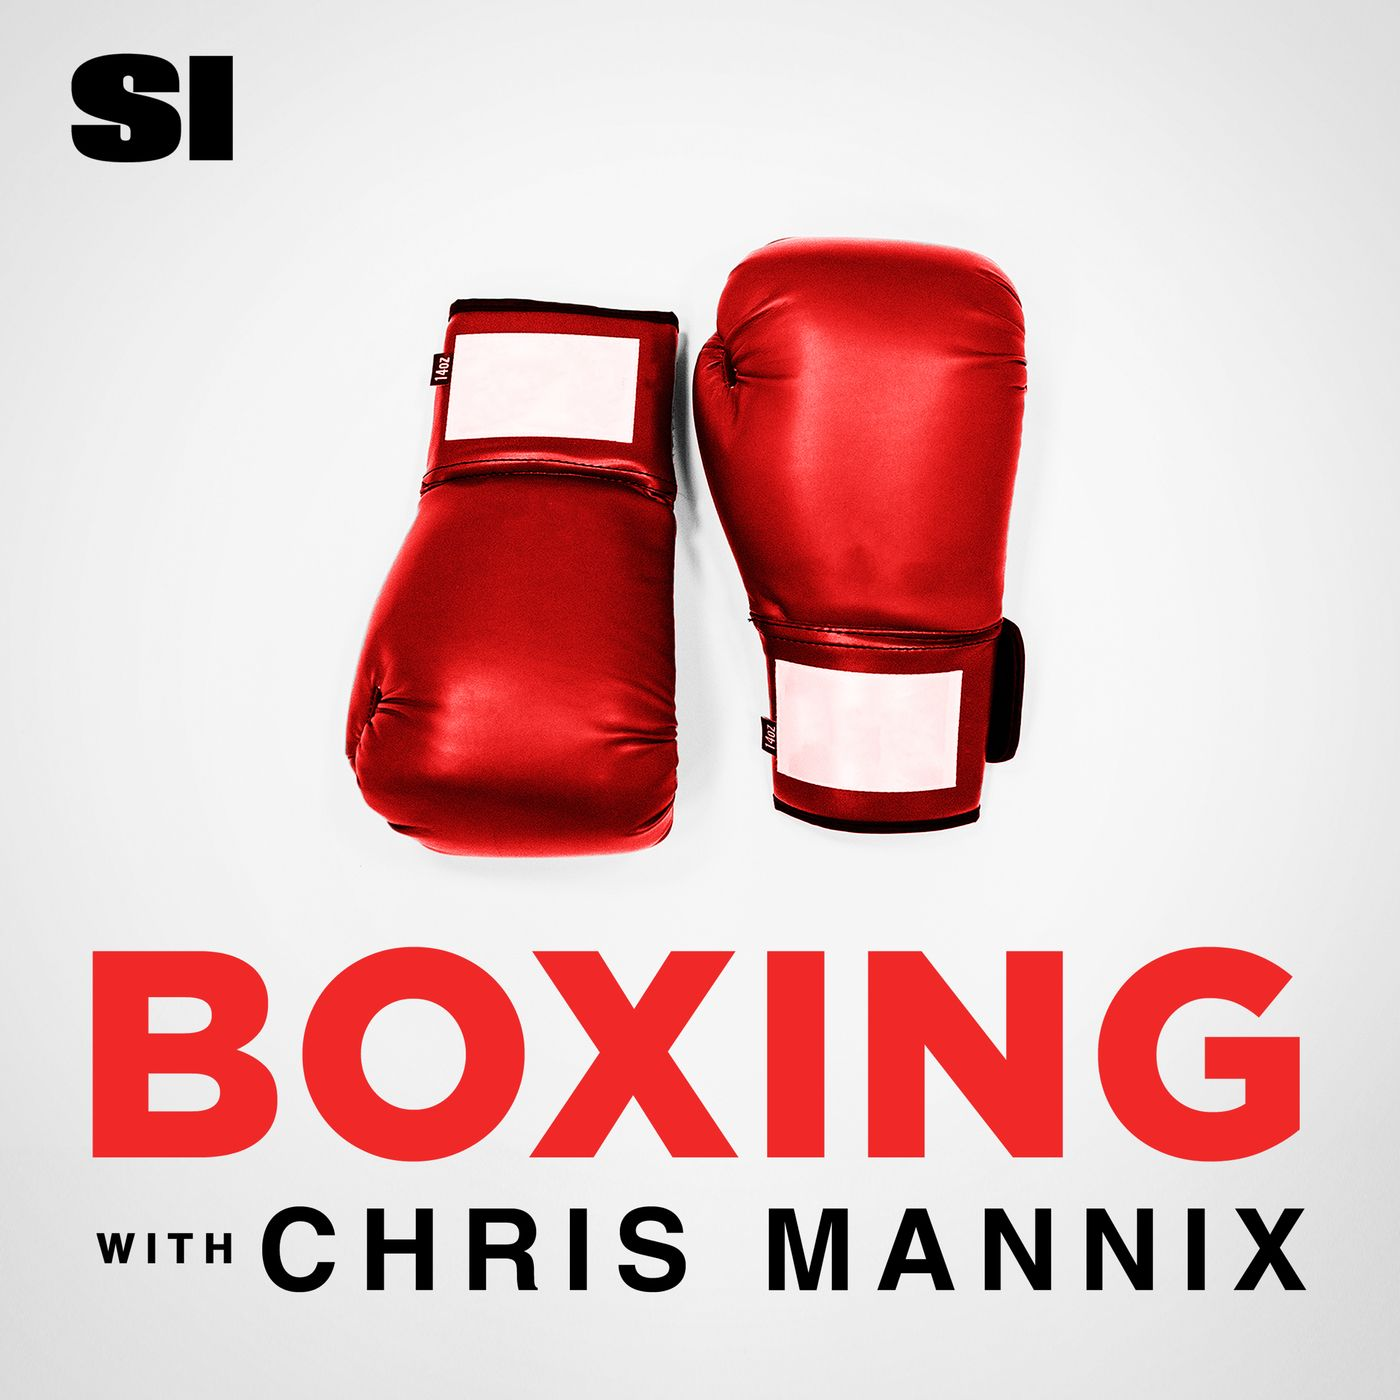 A highlight from Boxing with Chris Mannix - Misfits Take Center Stage